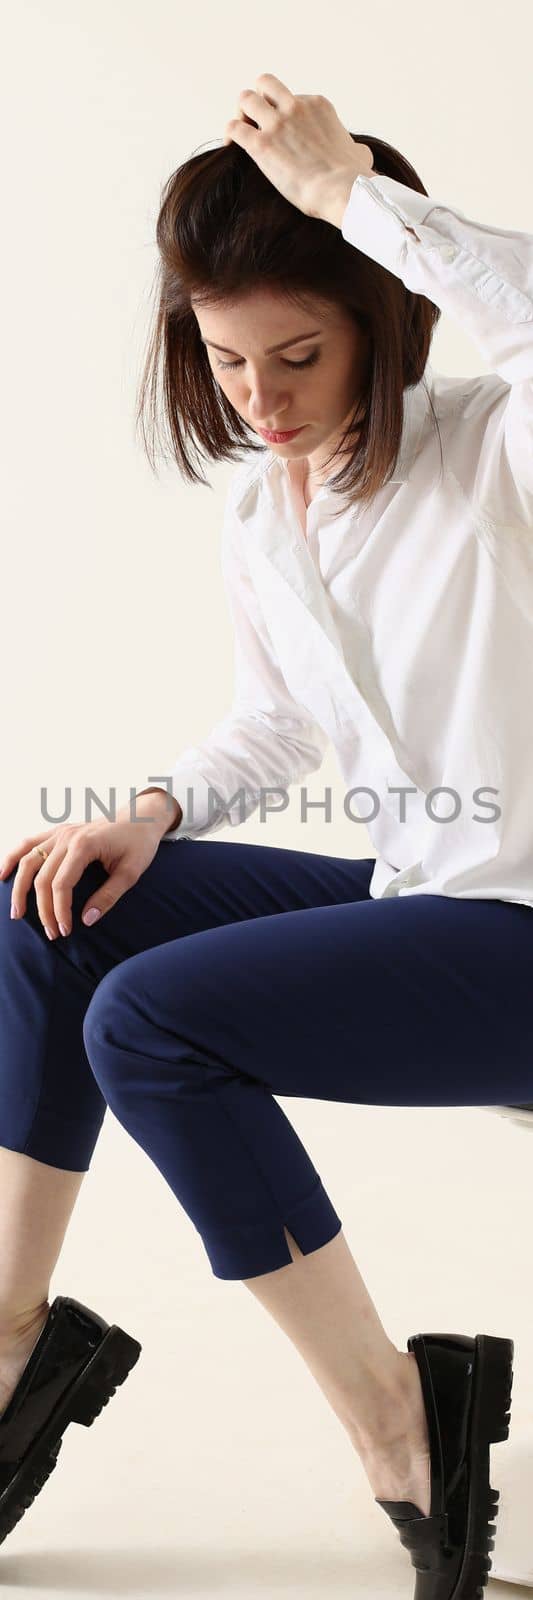 Woman in bad mood, bored and sad, sits on chair and puts hands on head by kuprevich